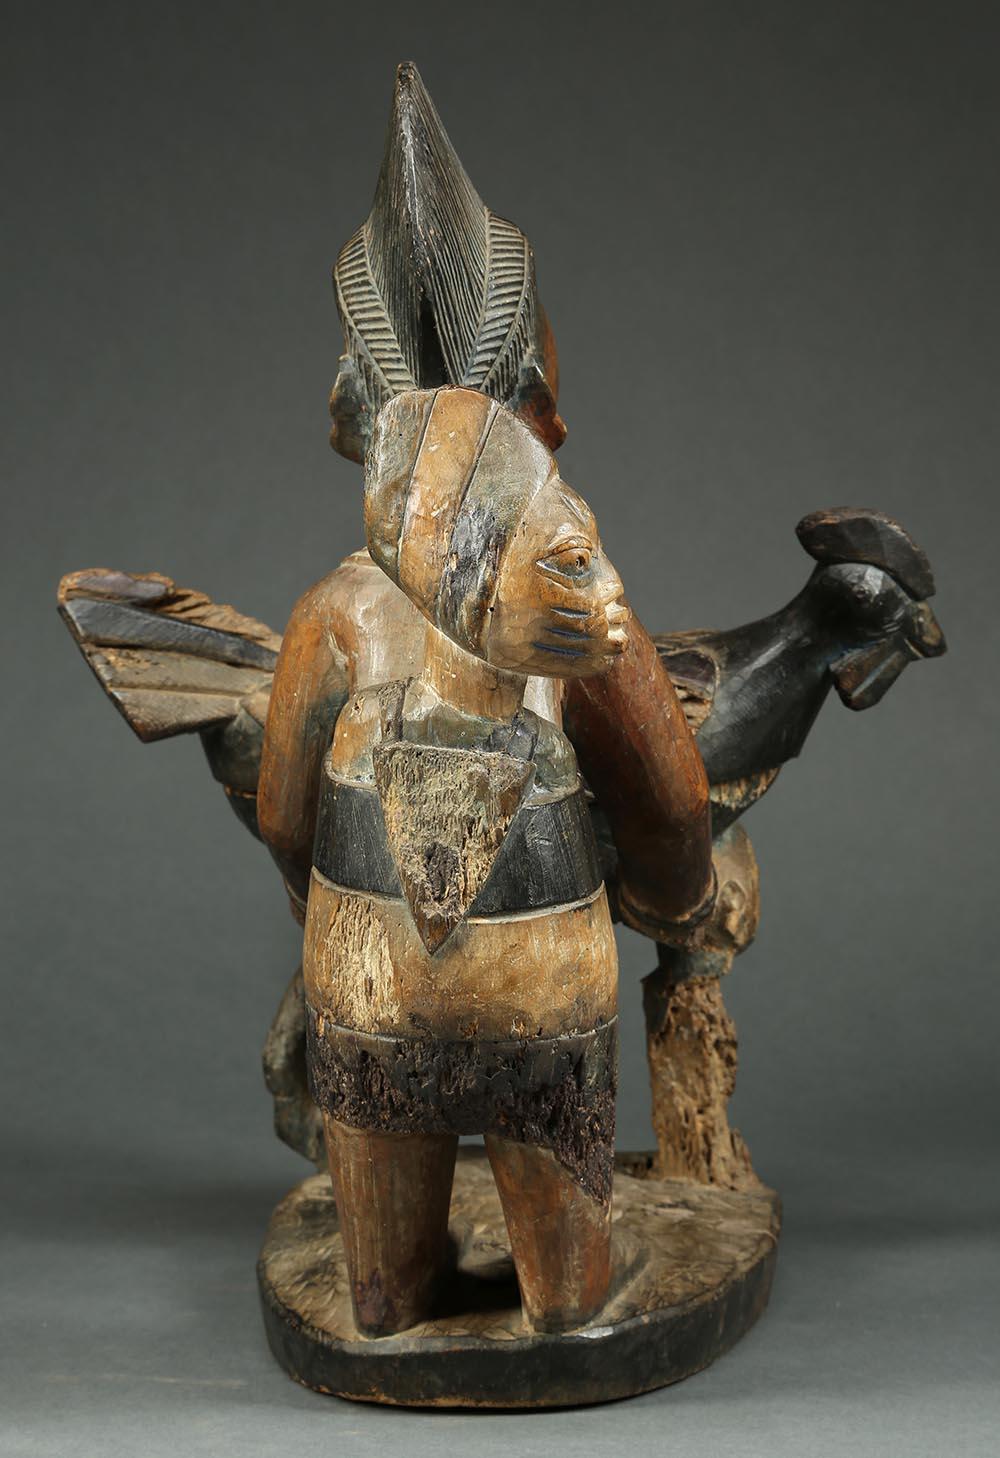 Yoruba Maternity Offering Bowl Figure with Chicken, Africa, Nigeria In Distressed Condition For Sale In Santa Fe, NM